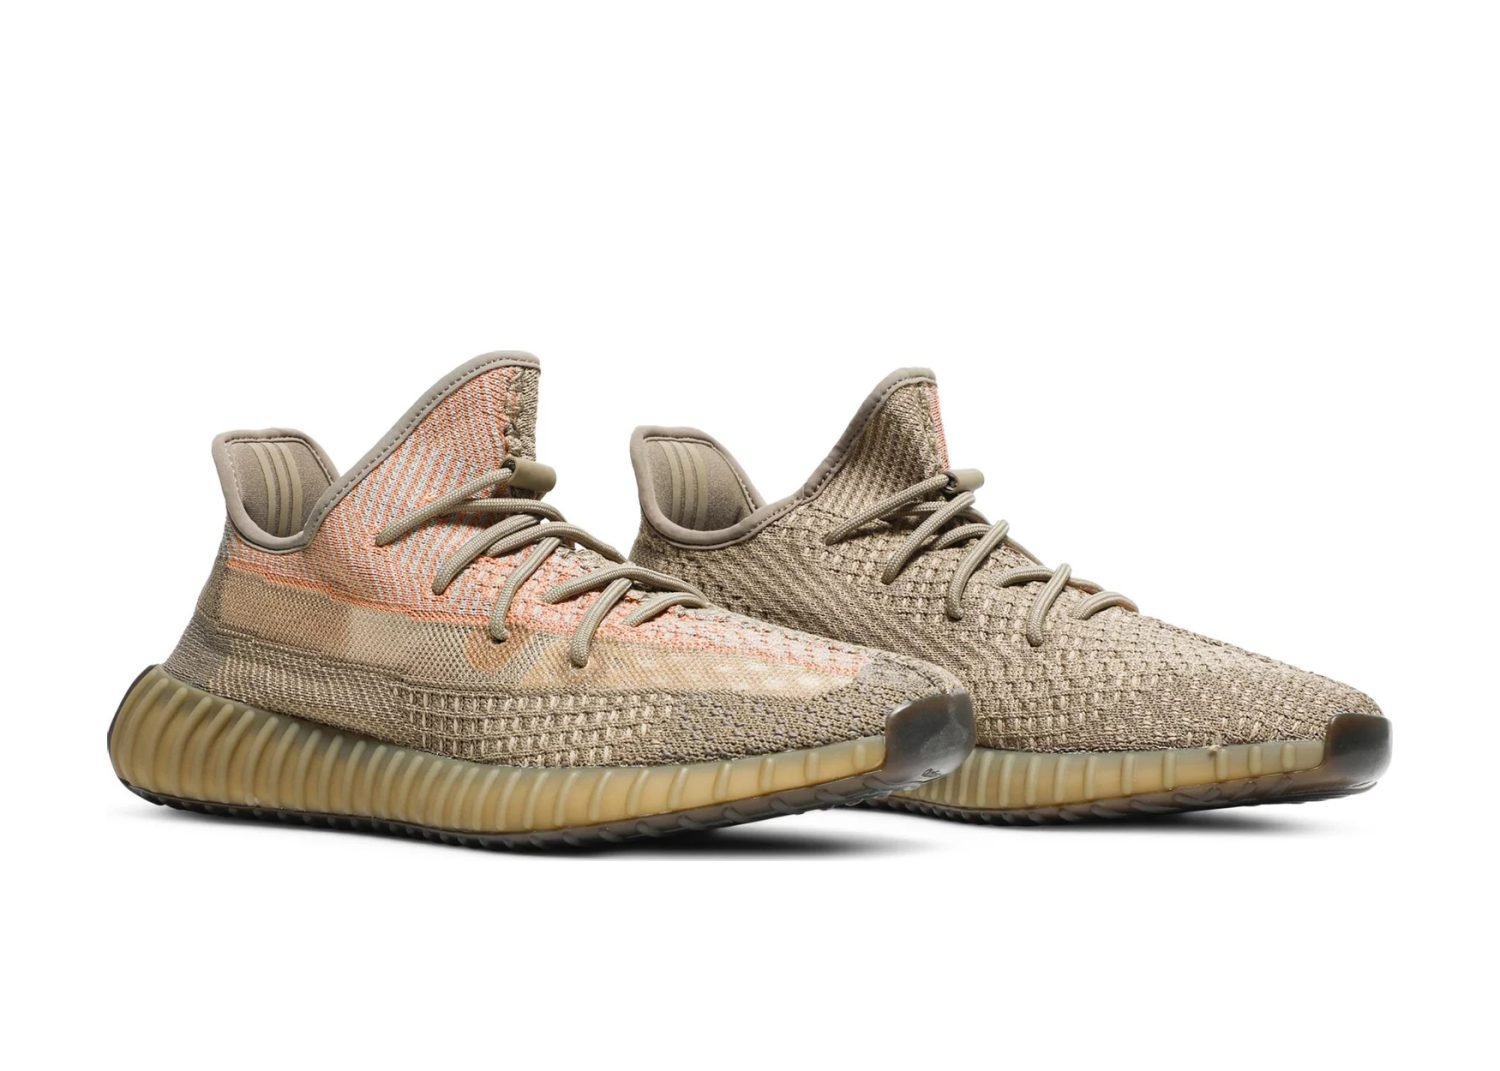 adidas yeezy boost 350 v2 sand taupe5